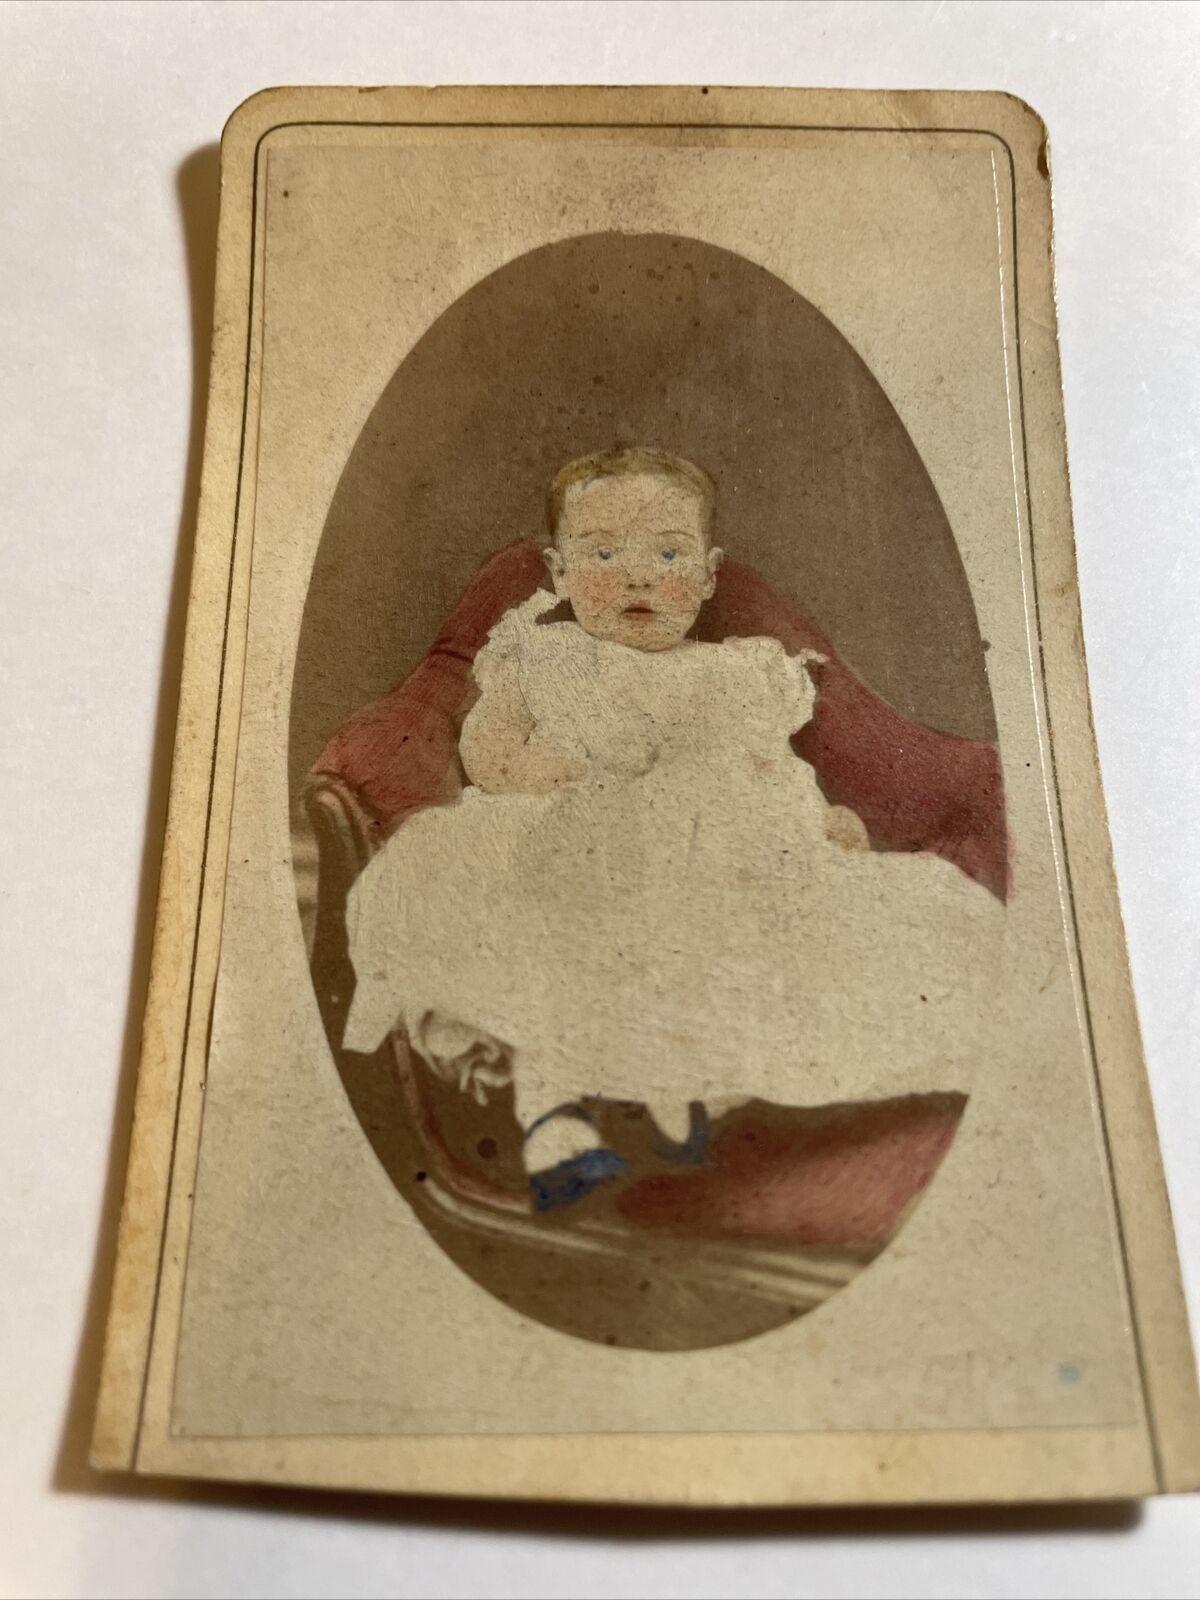 CDV BABY HAND COLORED 1870 STUDIO PORTRAIT BY HOWLAND, SAN FRANCISCO, CALIF